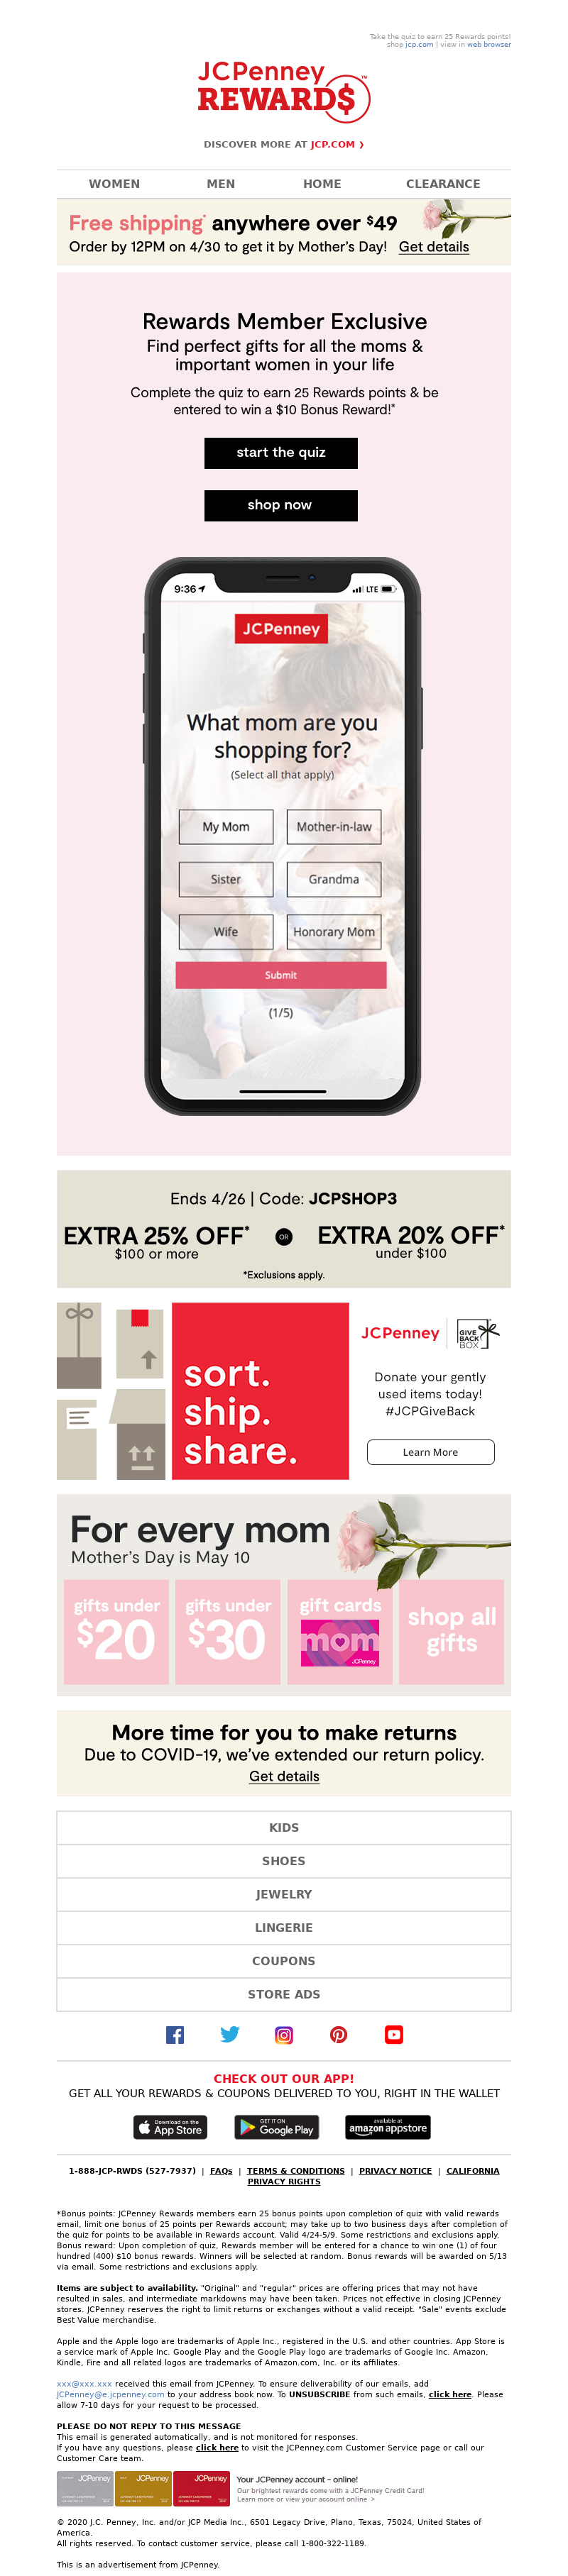 JCPenney - Shopping for Mother’s Day gifts?